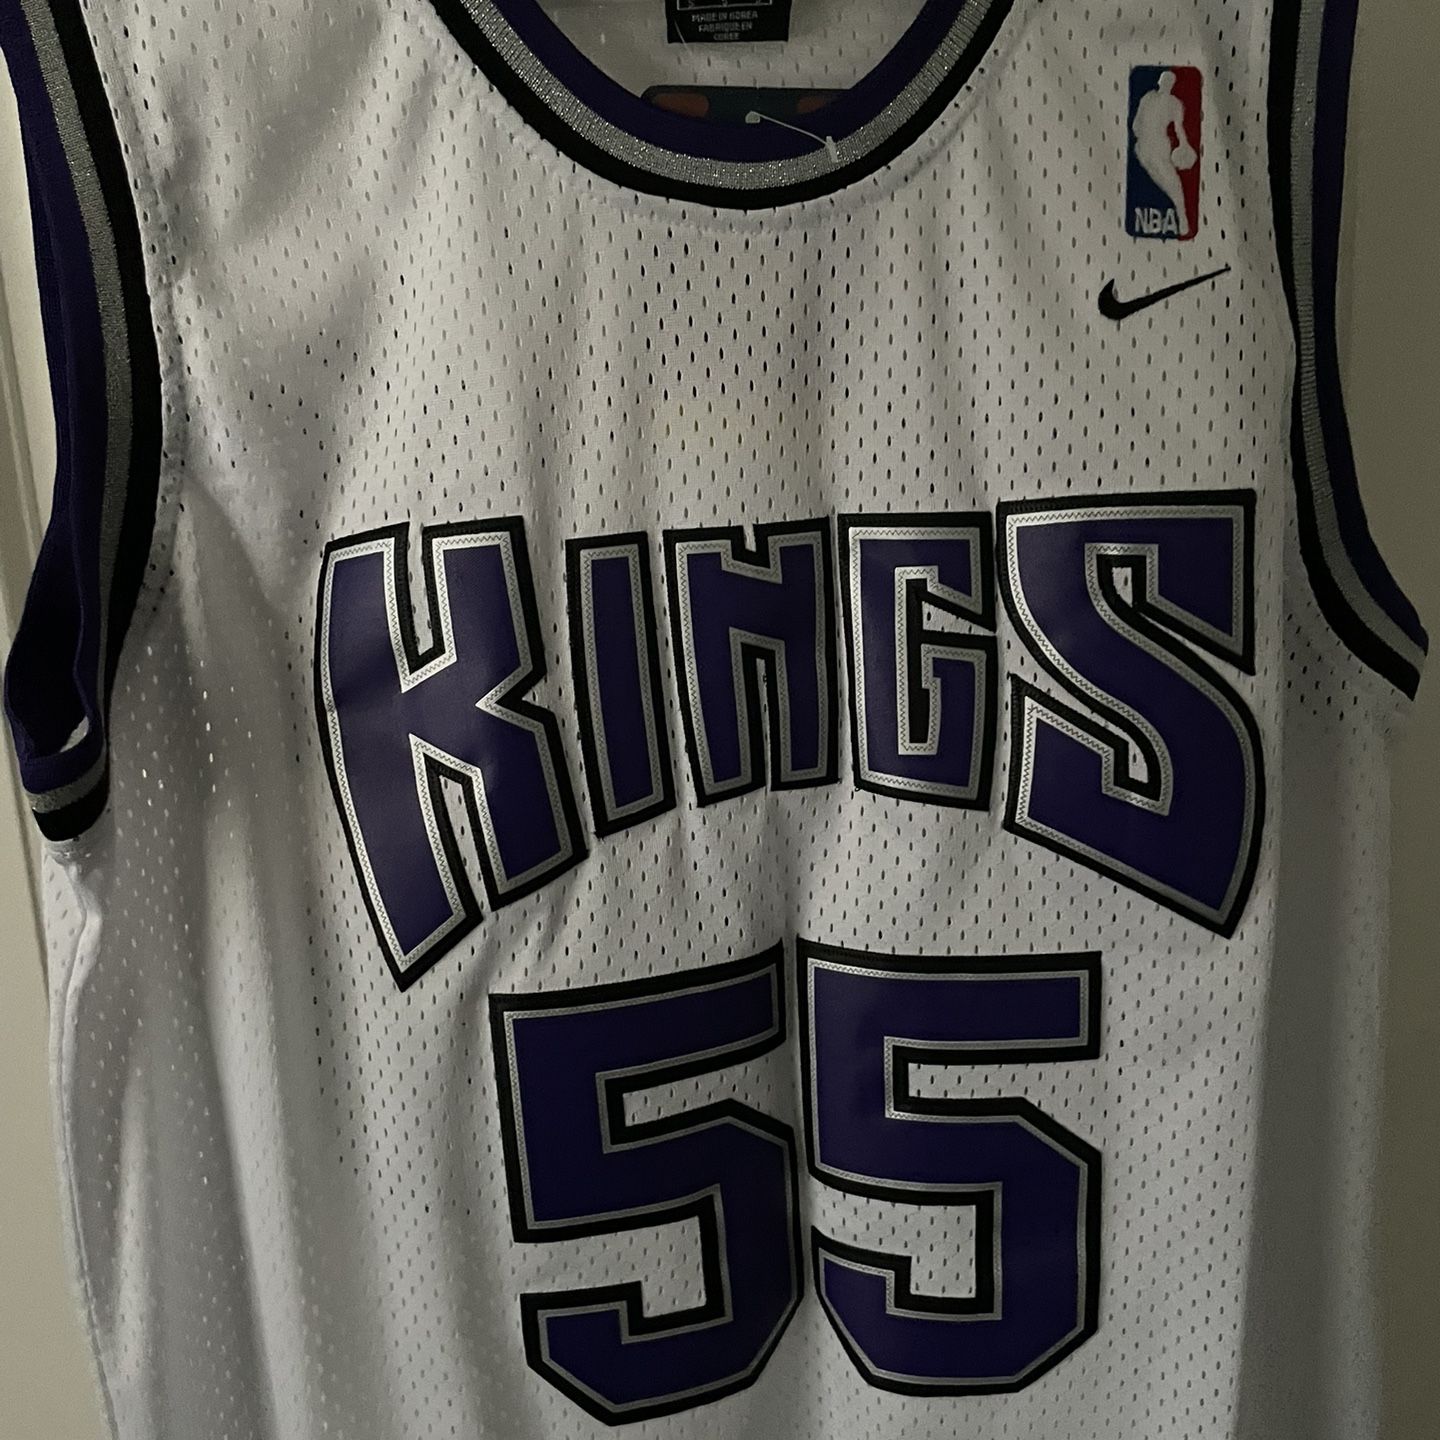 Jason Williams “White chocolate” Memphis Jersey for Sale in Riverside, CA -  OfferUp